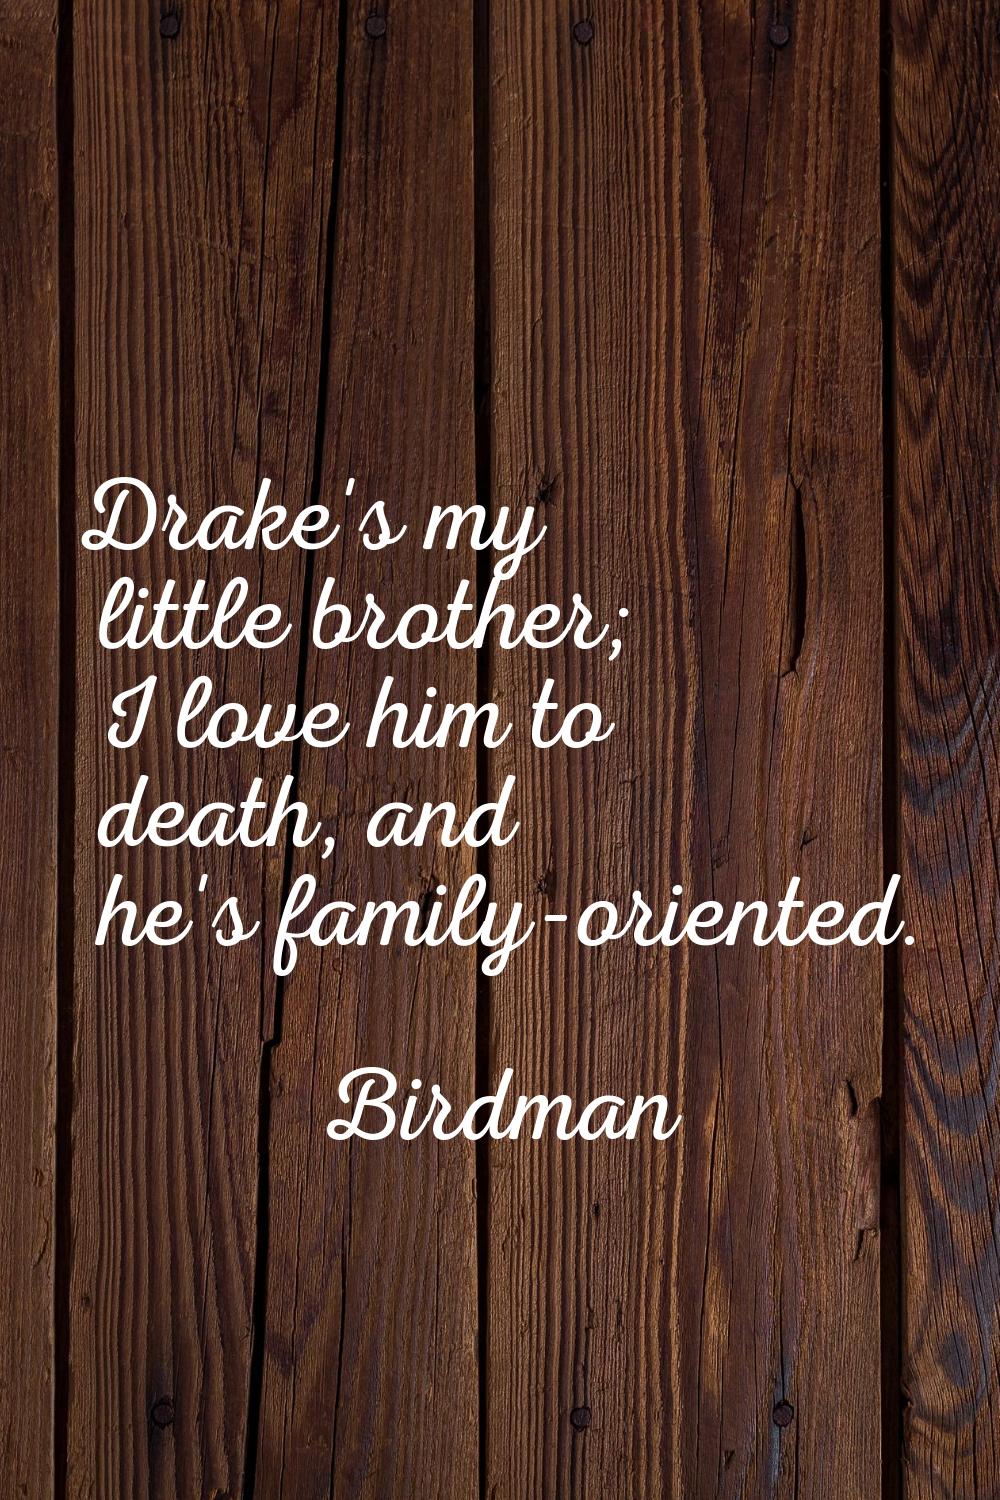 Drake's my little brother; I love him to death, and he's family-oriented.